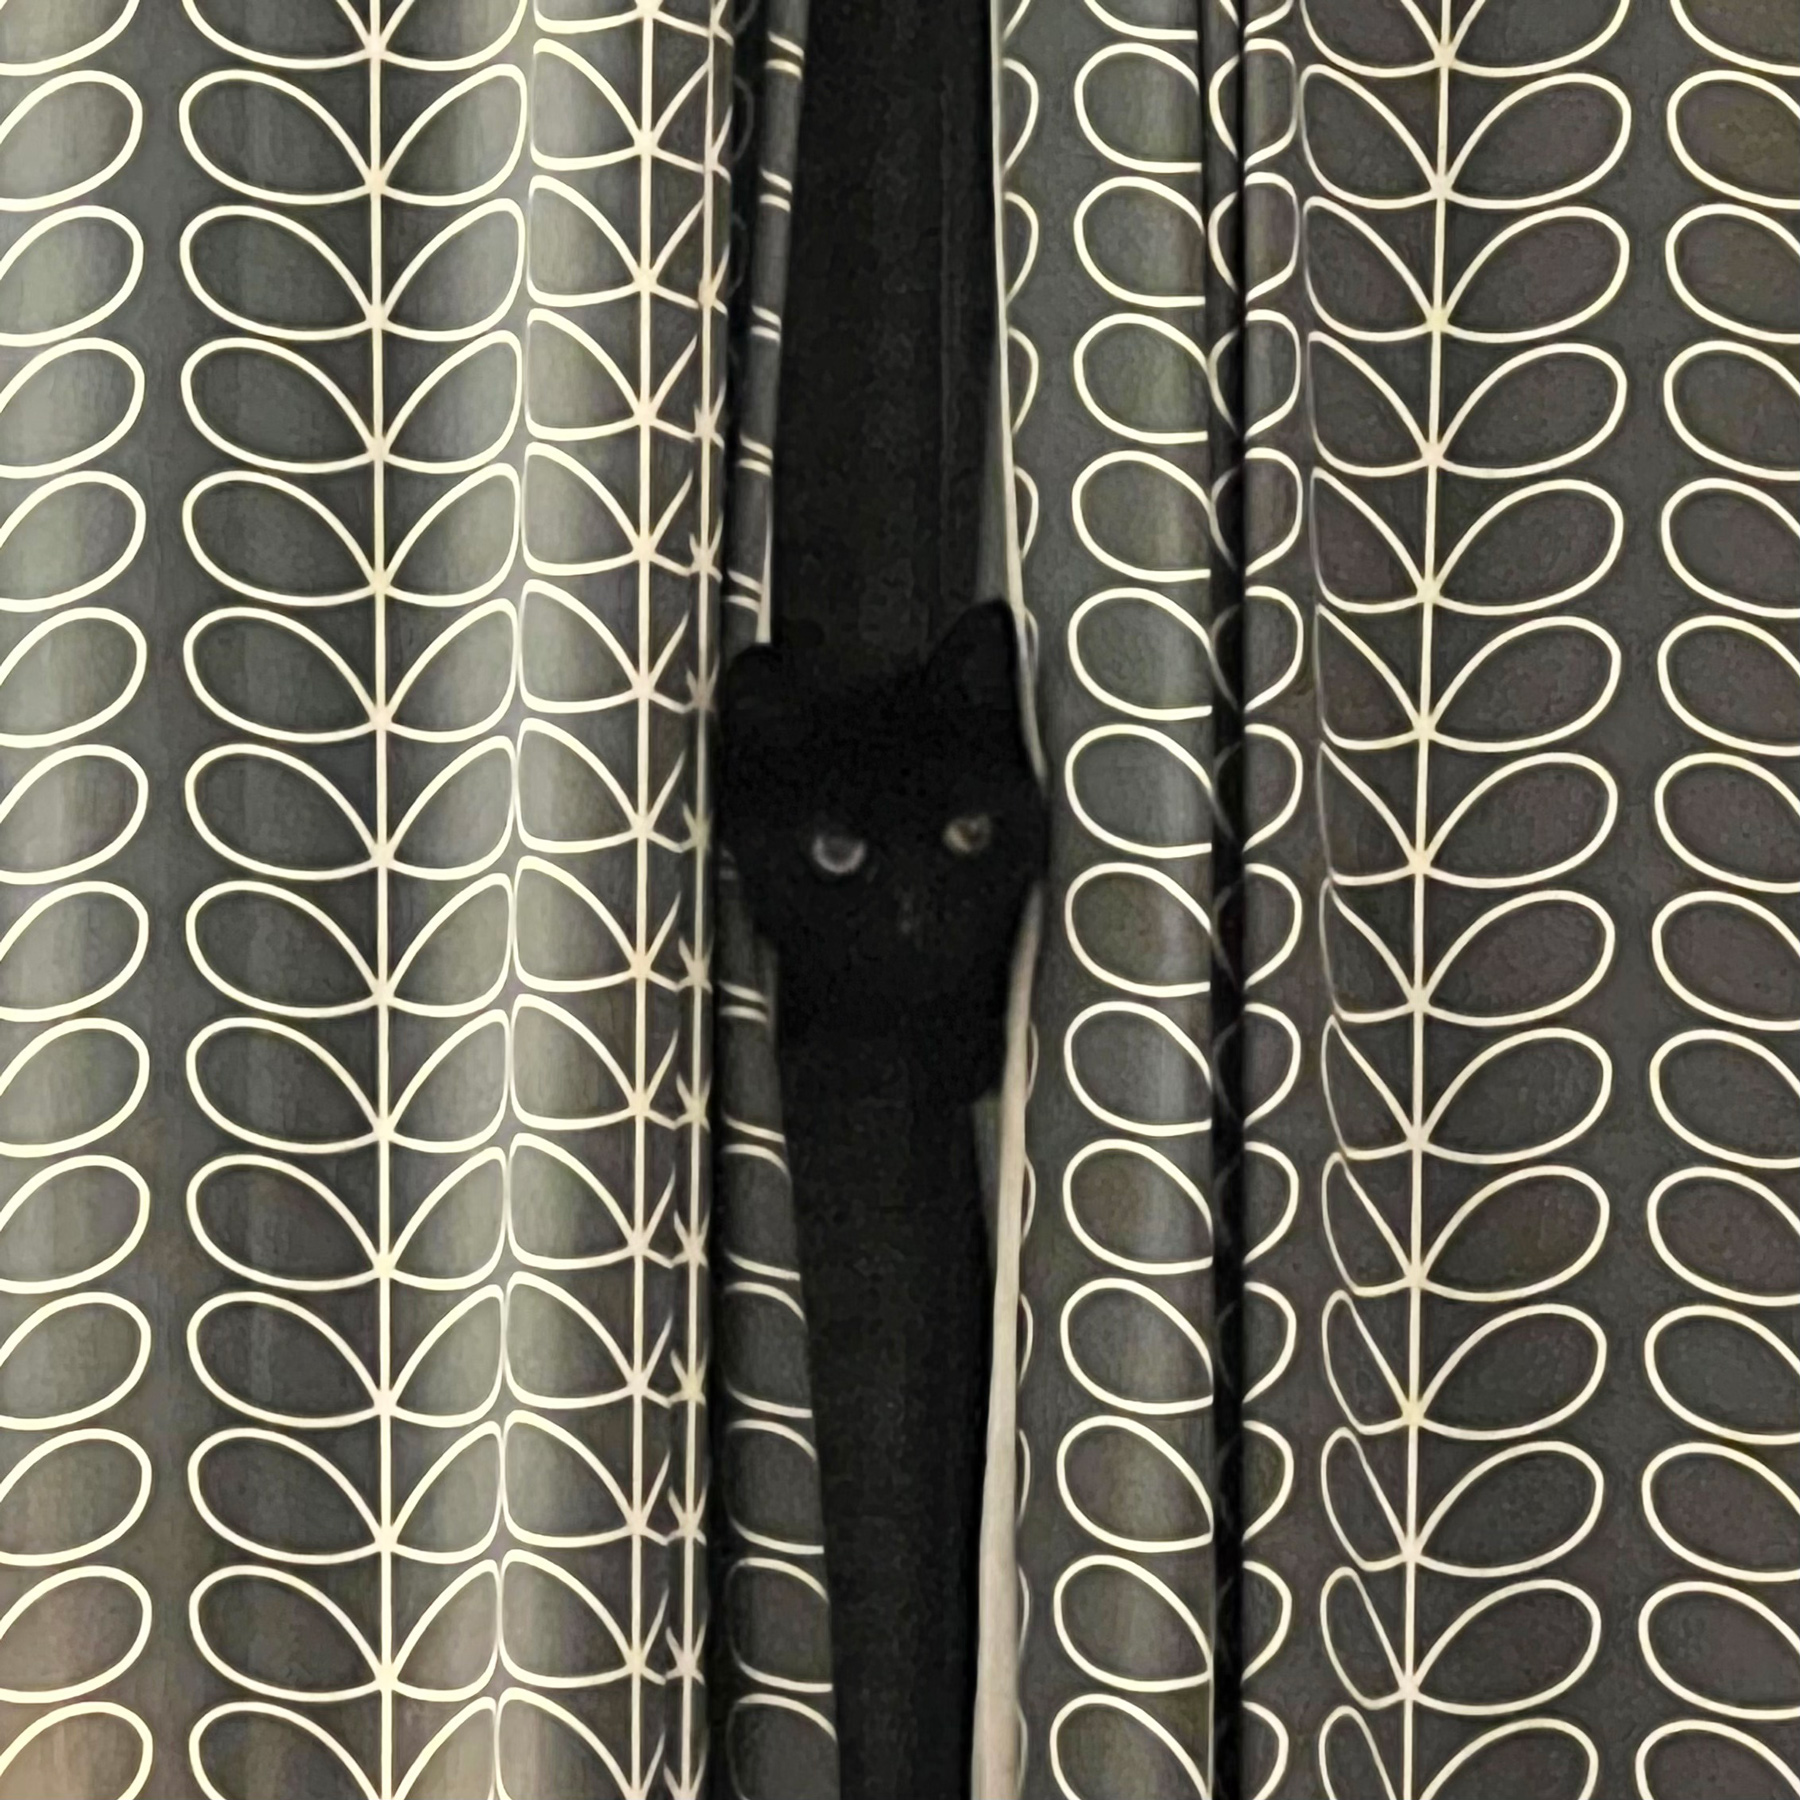 A small black cat poking her head through some curtains